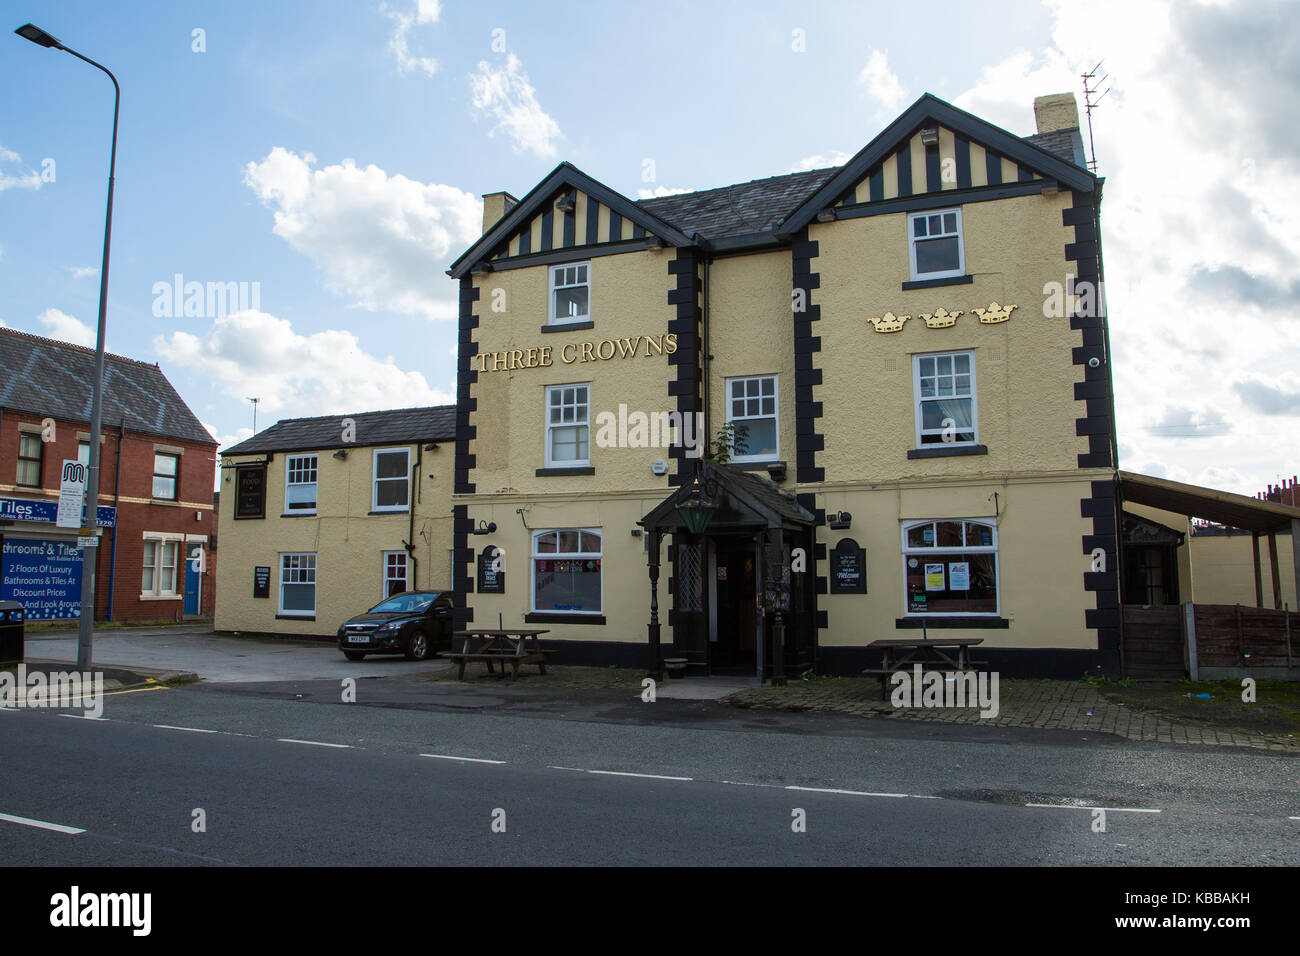 Three Crowns Public House In Leigh, England, UK Stock Photo